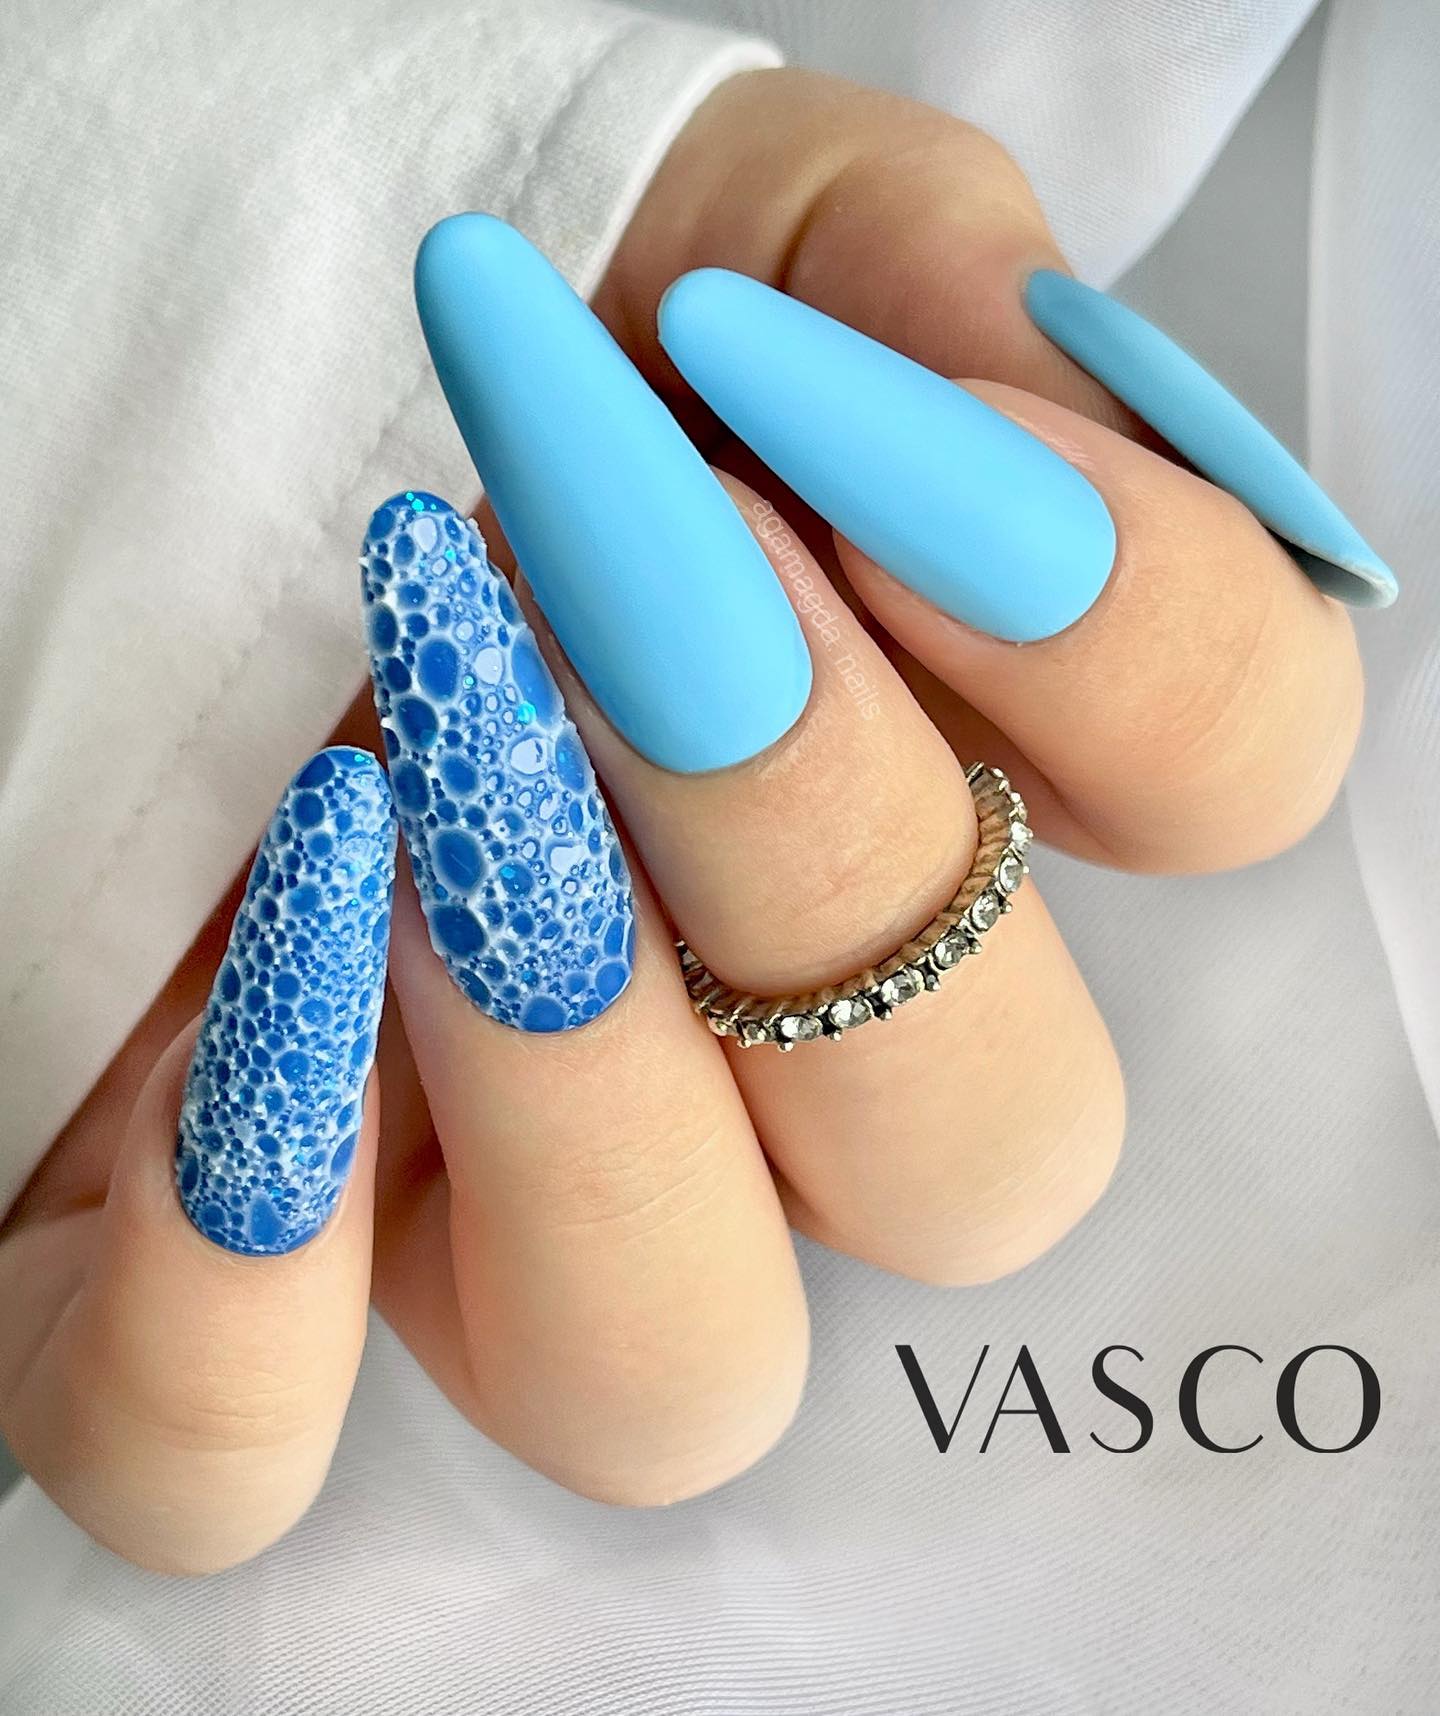 You can wear baby blue color all year long and it is one of the colors that go well with all skin tones. To get the feeling of tranquility, go for this baby blue matte nail polish. Plus, water droplets nail design is a nice way to decorate them.